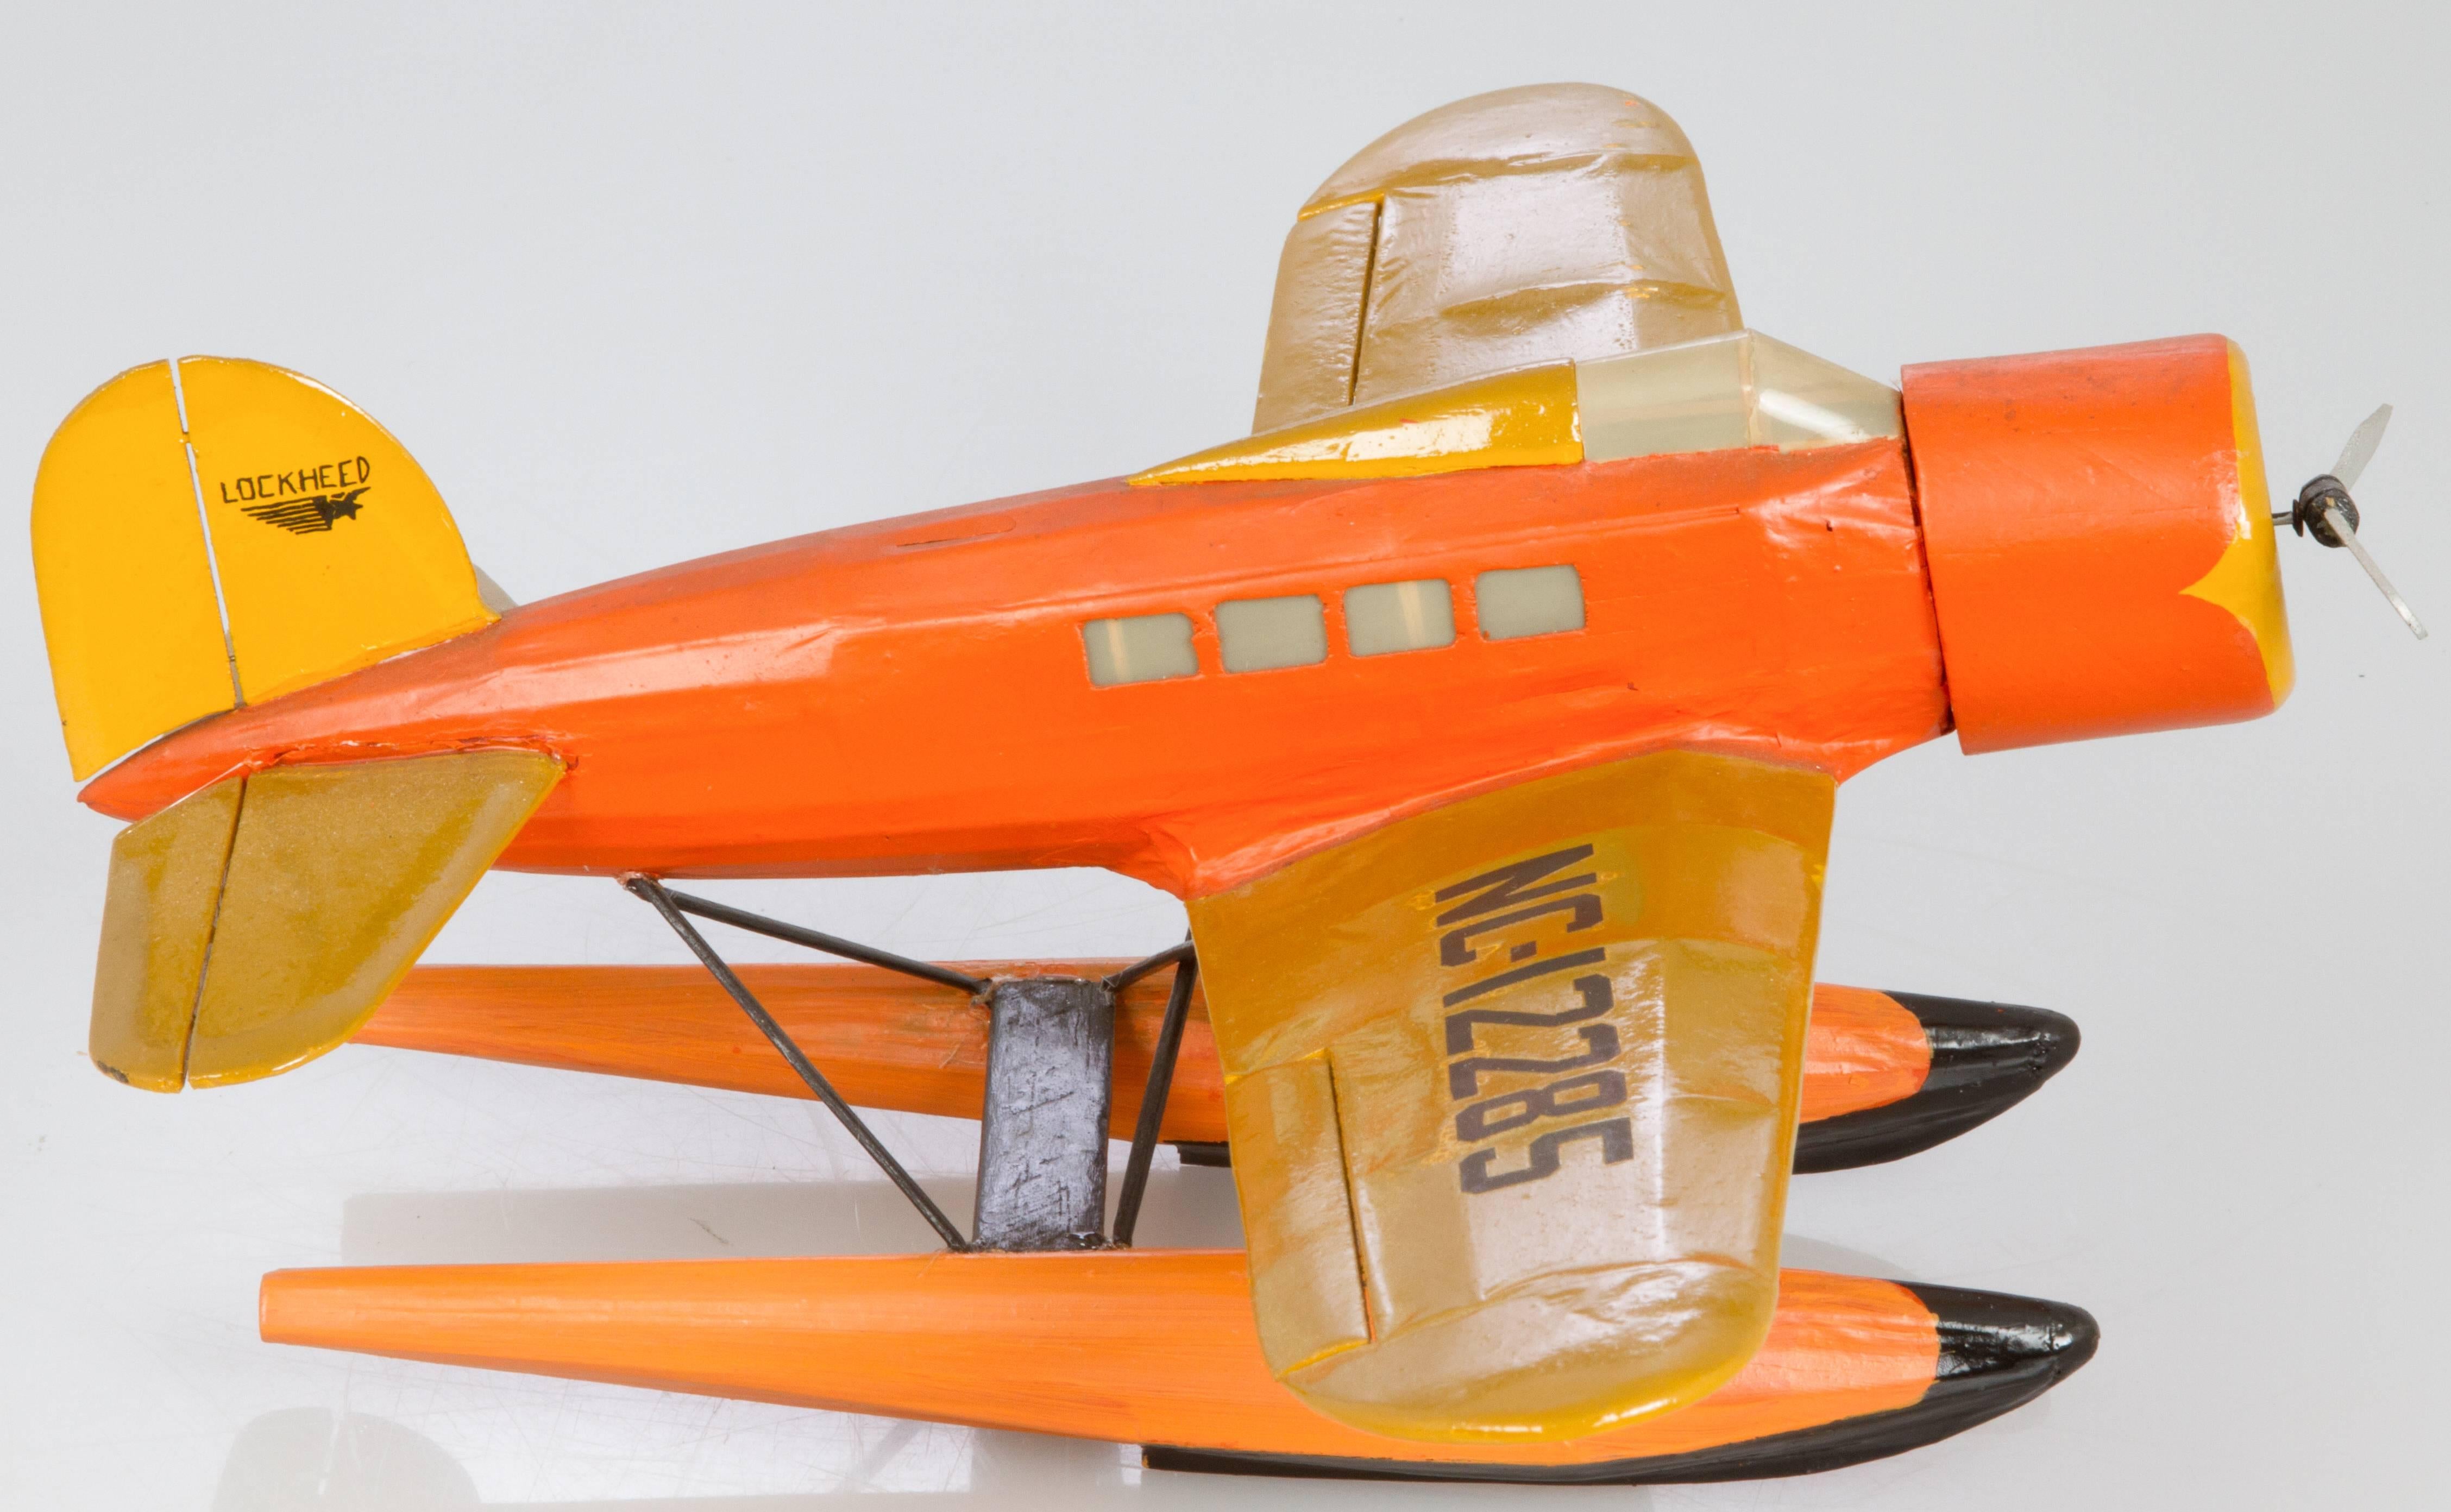 This is a handmade model, we believe from the 1930s. Light weight, made from balsa wood. This model is similar to Wiley Post's Lockheed Orion/ Explorer which crashed in Alaska with Wiley Post and Will Rogers.